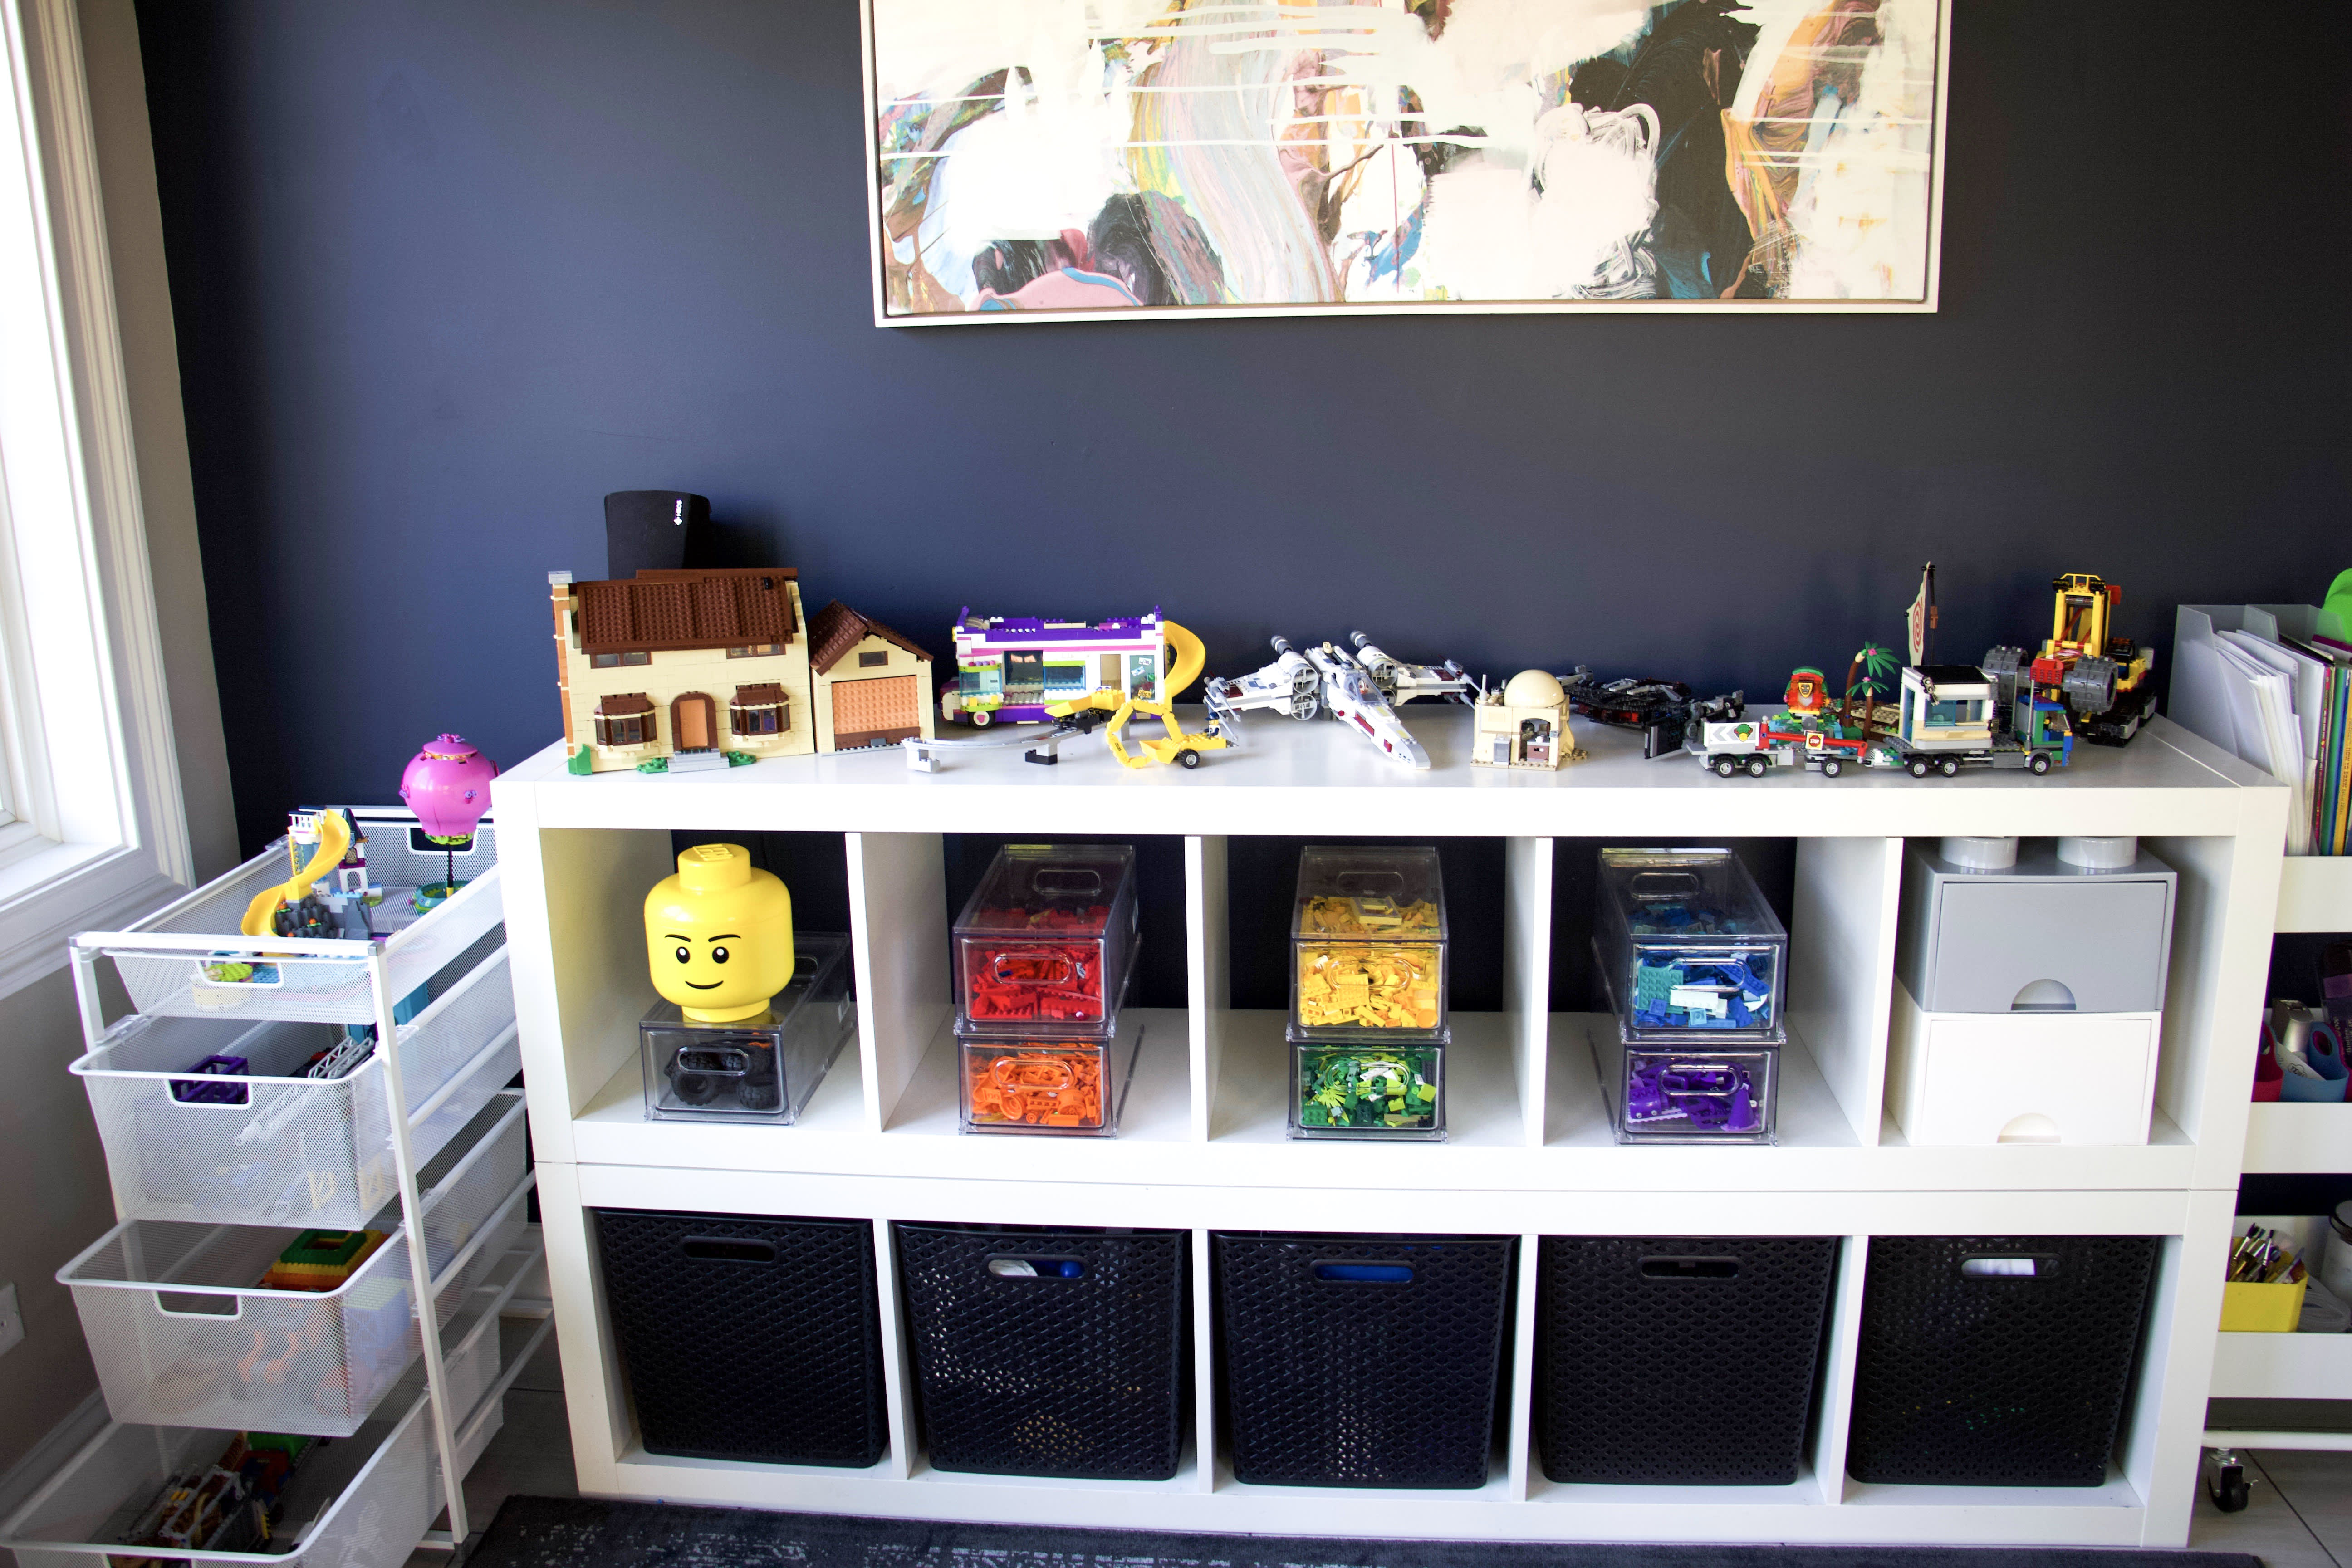 https://cdn.apartmenttherapy.info/image/upload/v1696624399/at/organize-clean/2023/Product/lego-storage/legos-the-organized-mama-2.jpg